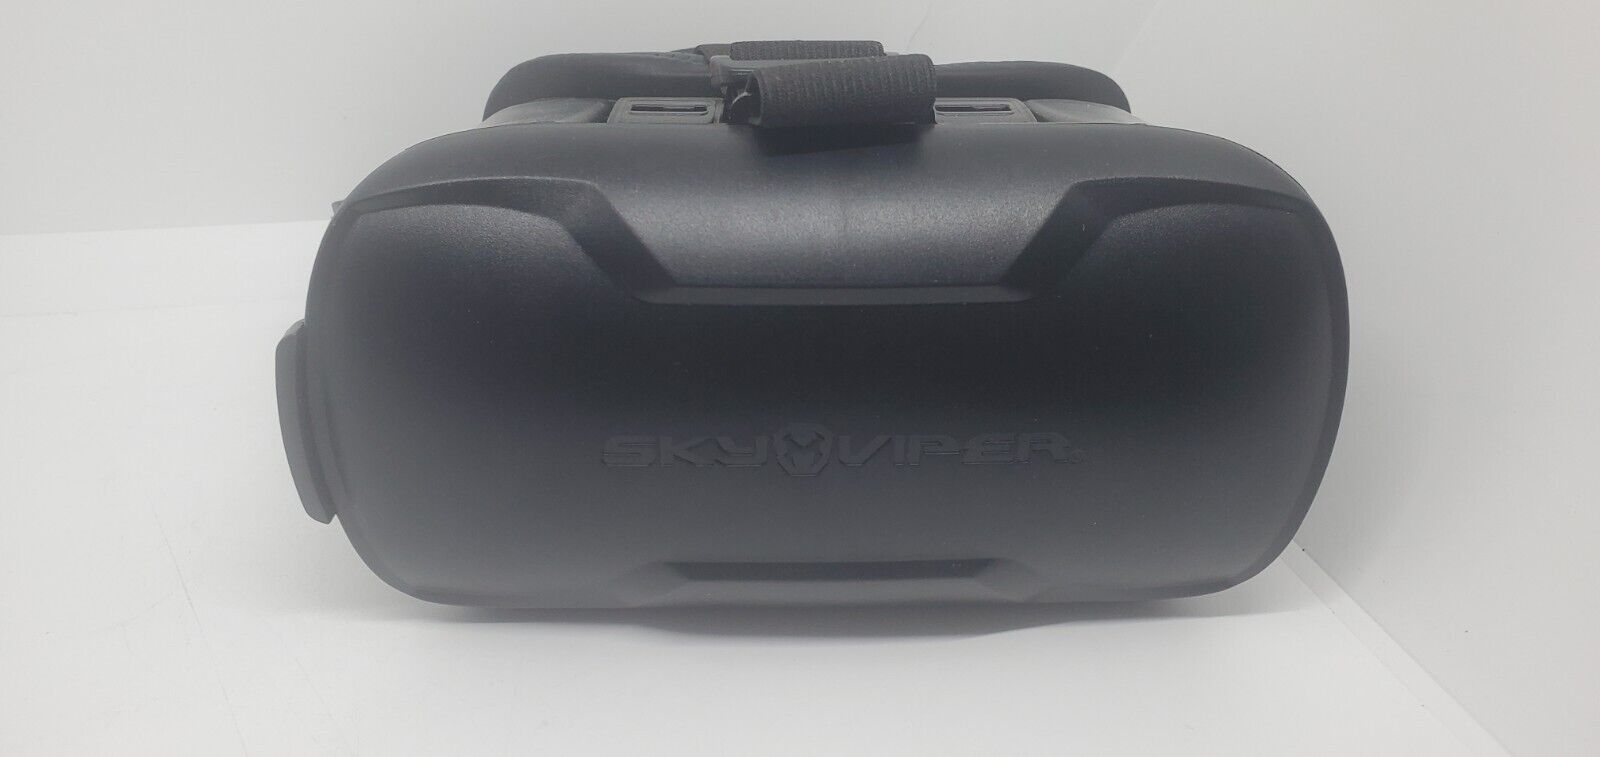 Sky Viper v2450FPV Streaming Drone ONLY Goggles